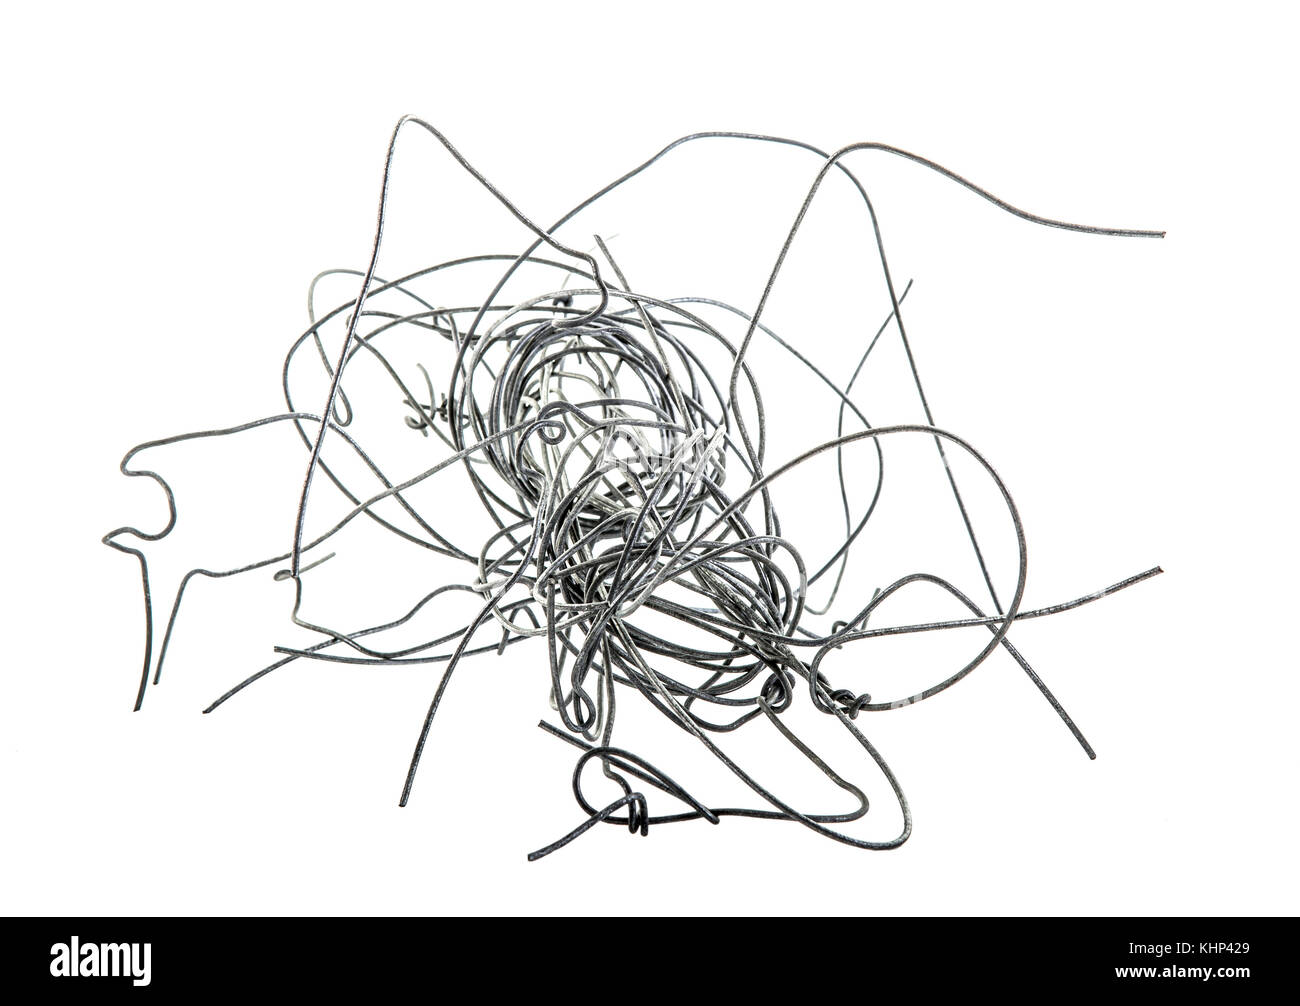 Random tangle of wires on a white background Stock Photo